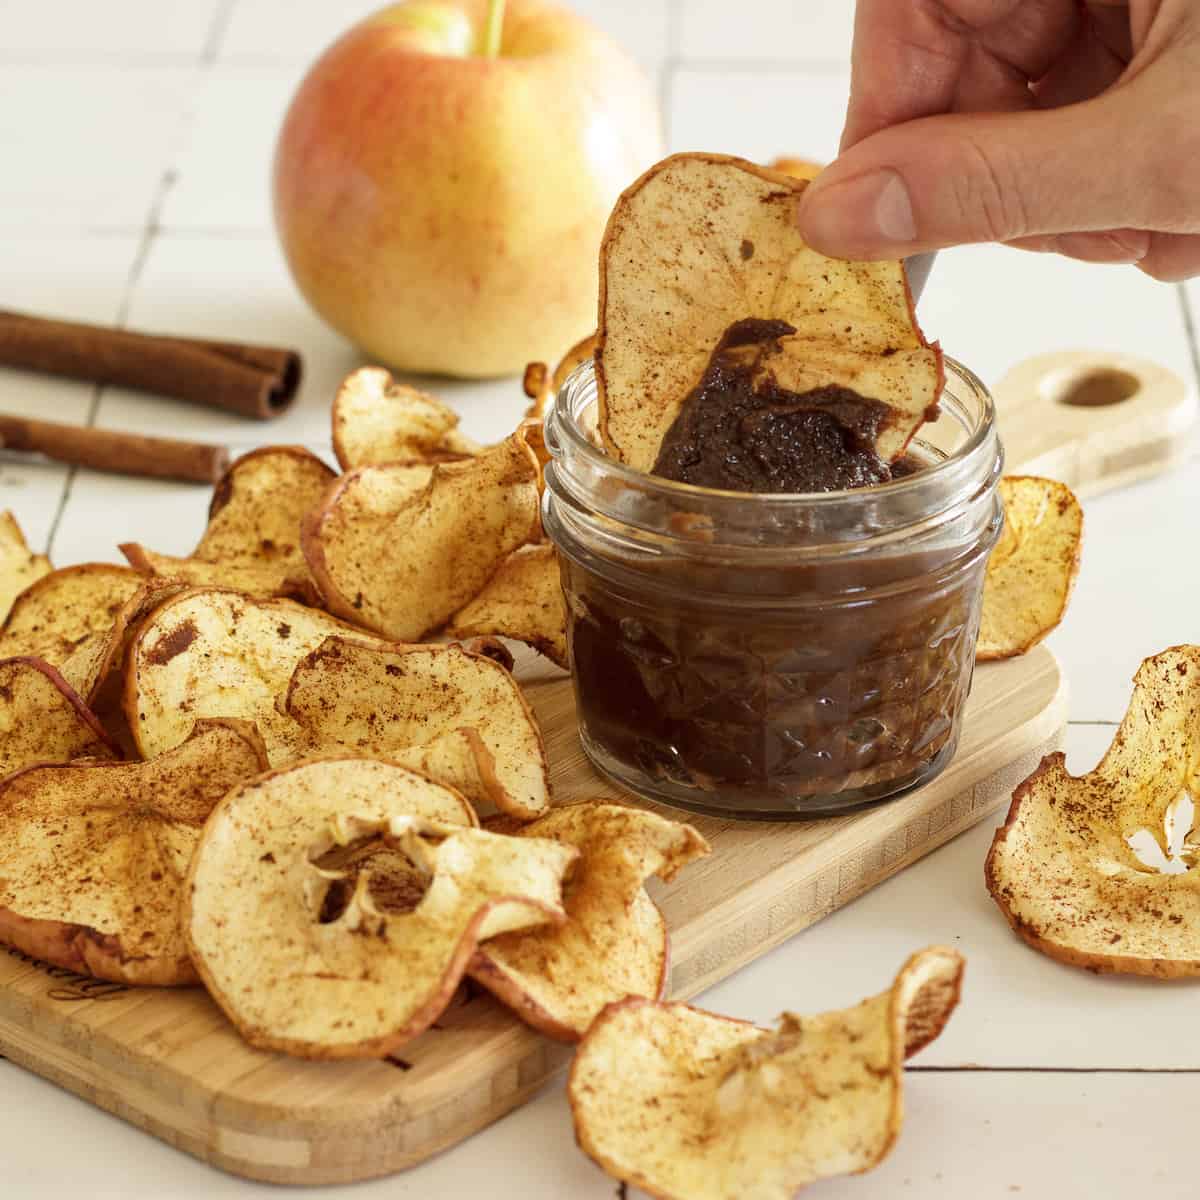 A board with a pile of air fryer apple chips and a small jar of chocolate dip. A hand is dipping an apple chip into the chocolate dip. An apple and cinnamon stick in the background